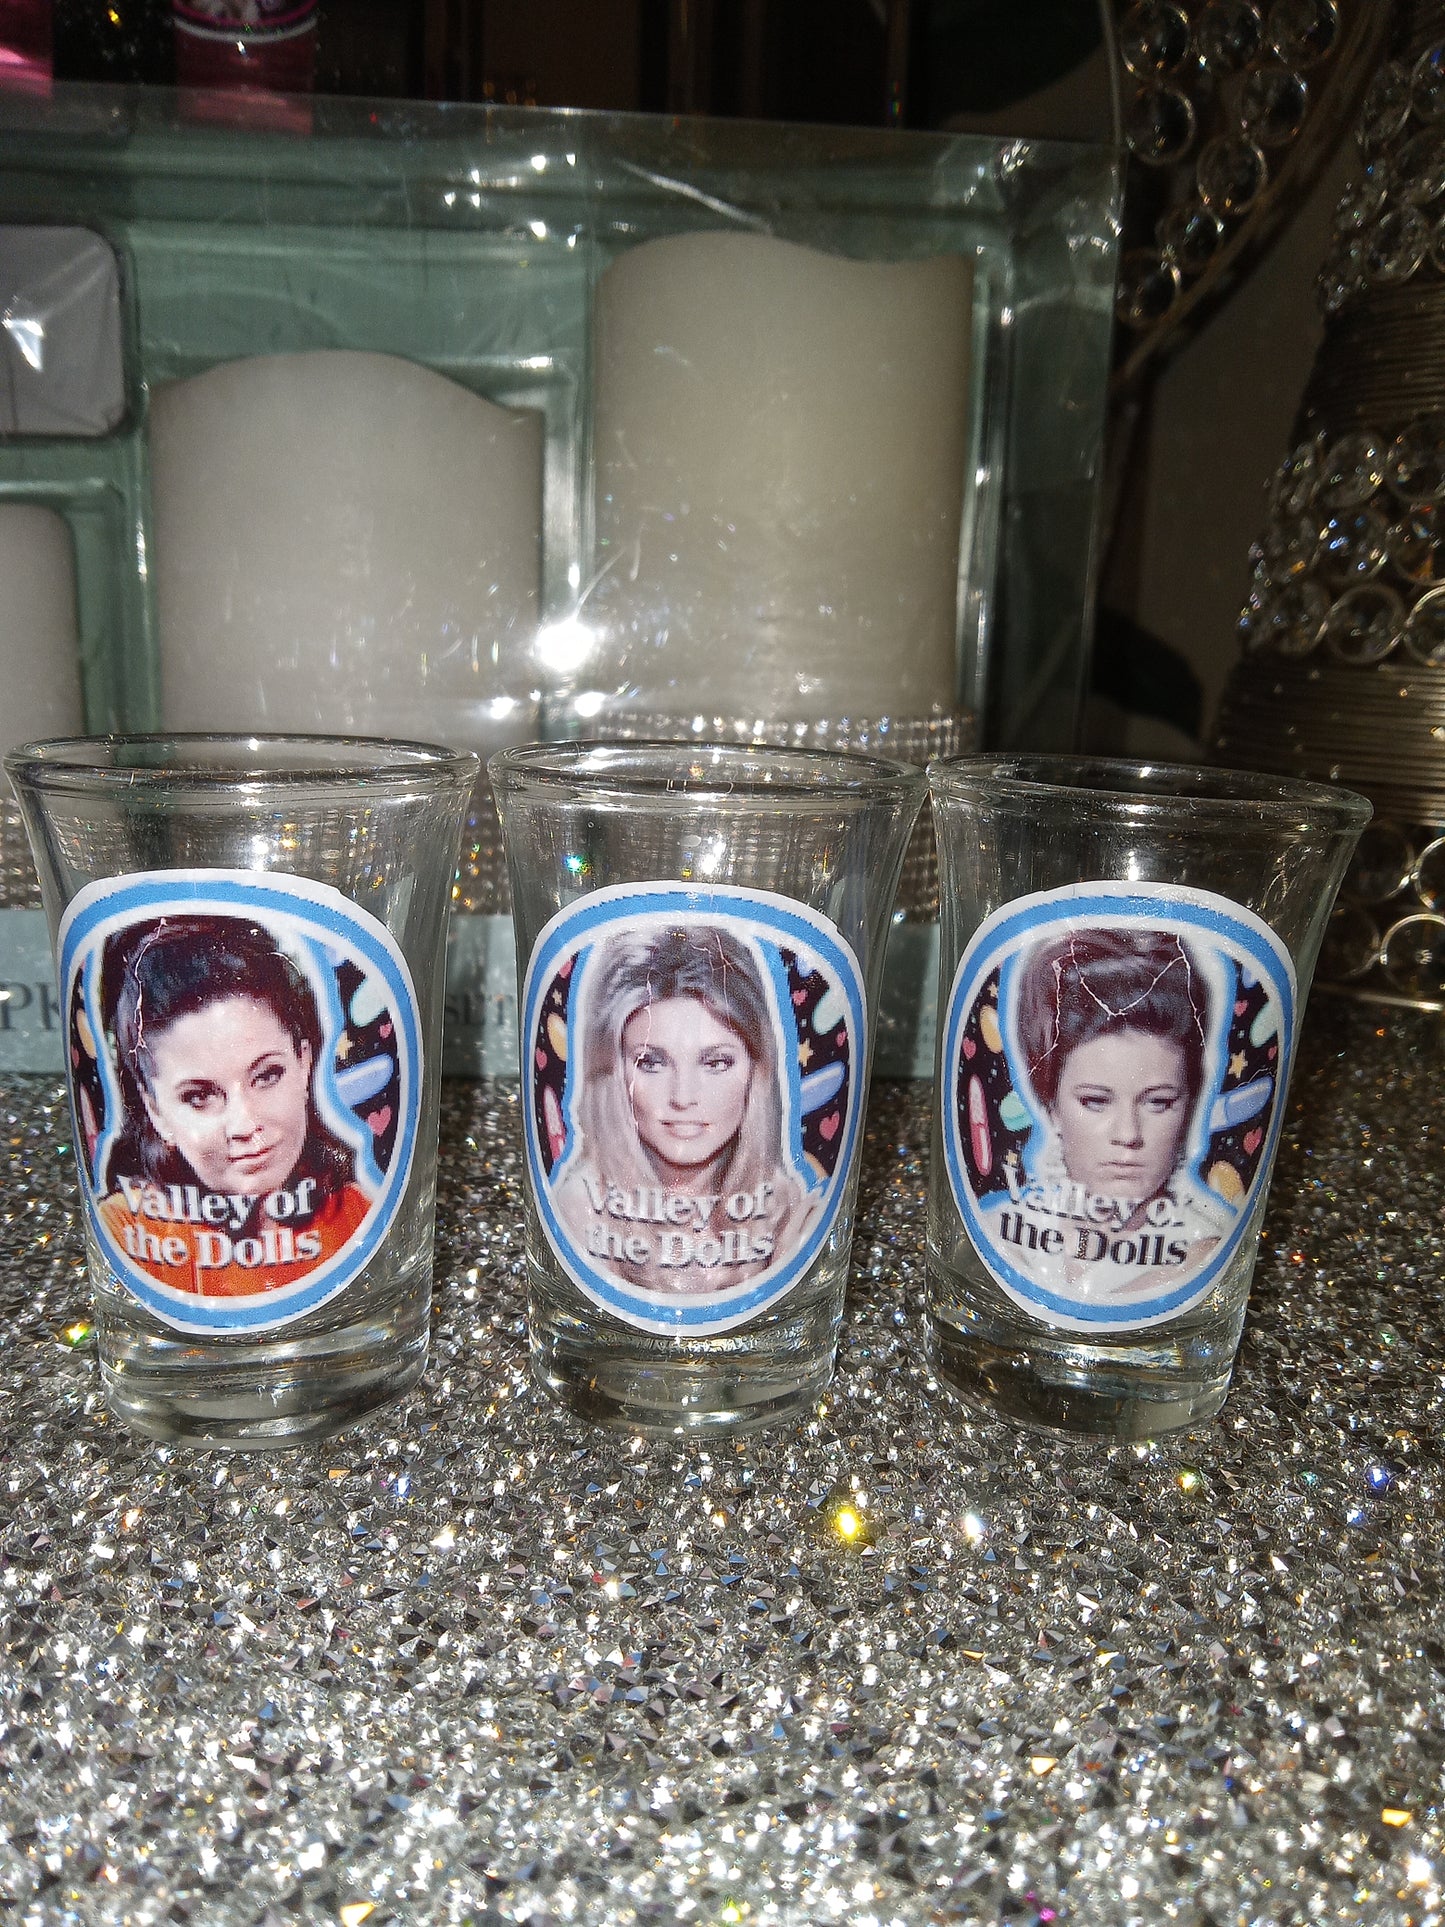 Valley of The Dolls Shot glasses